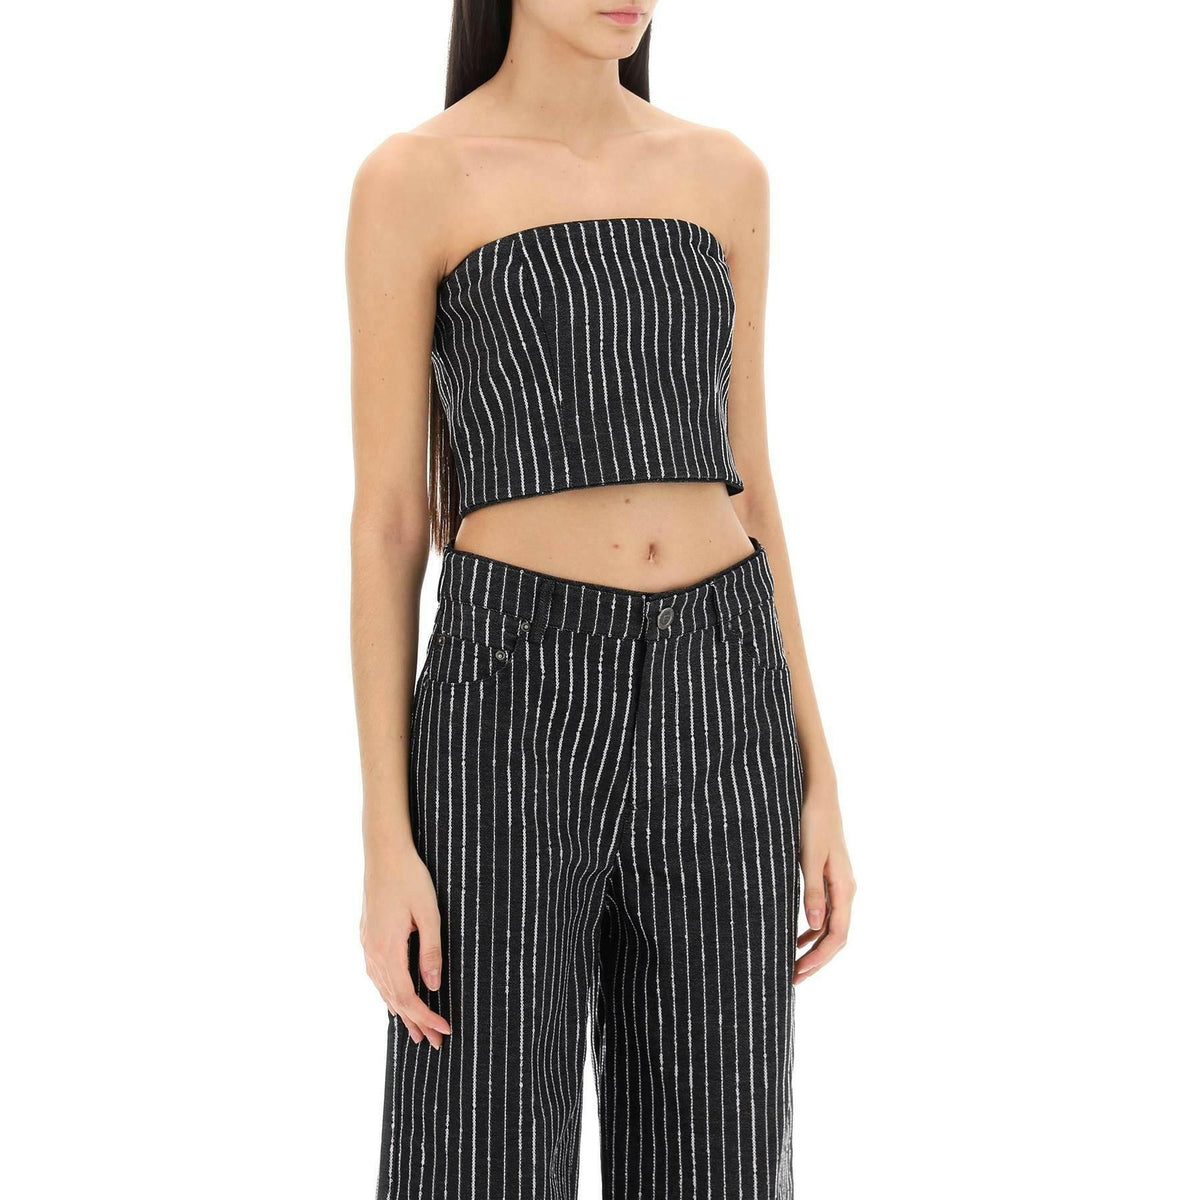 Cropped Top With Sequined Stripes ROTATE JOHN JULIA.